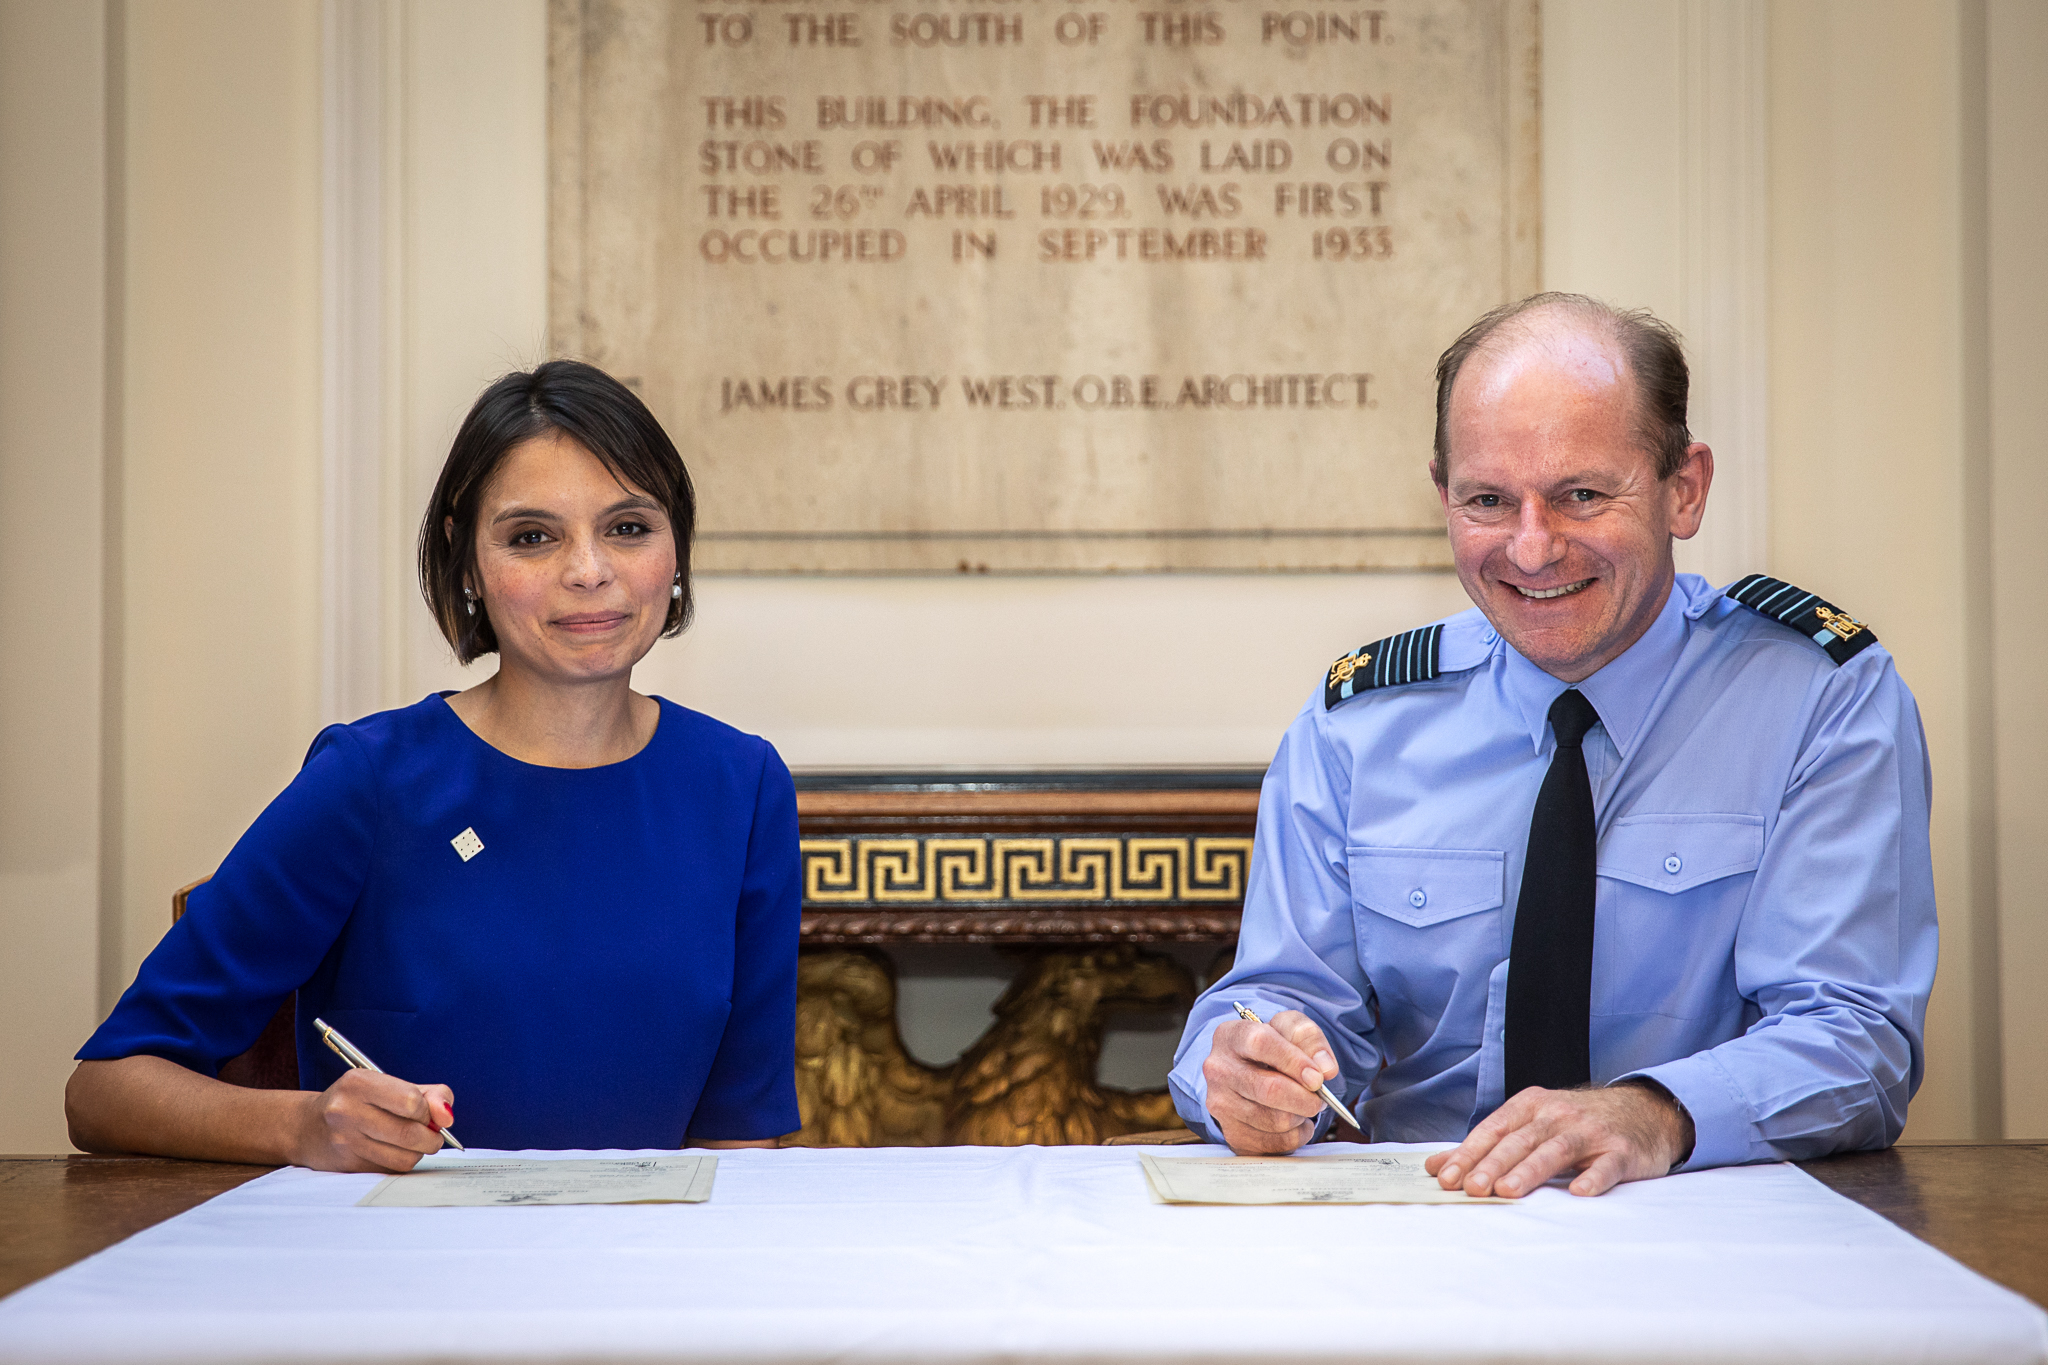 Image shows Chief of the Air Staff with Dr Emma Egging signing the document at a table.